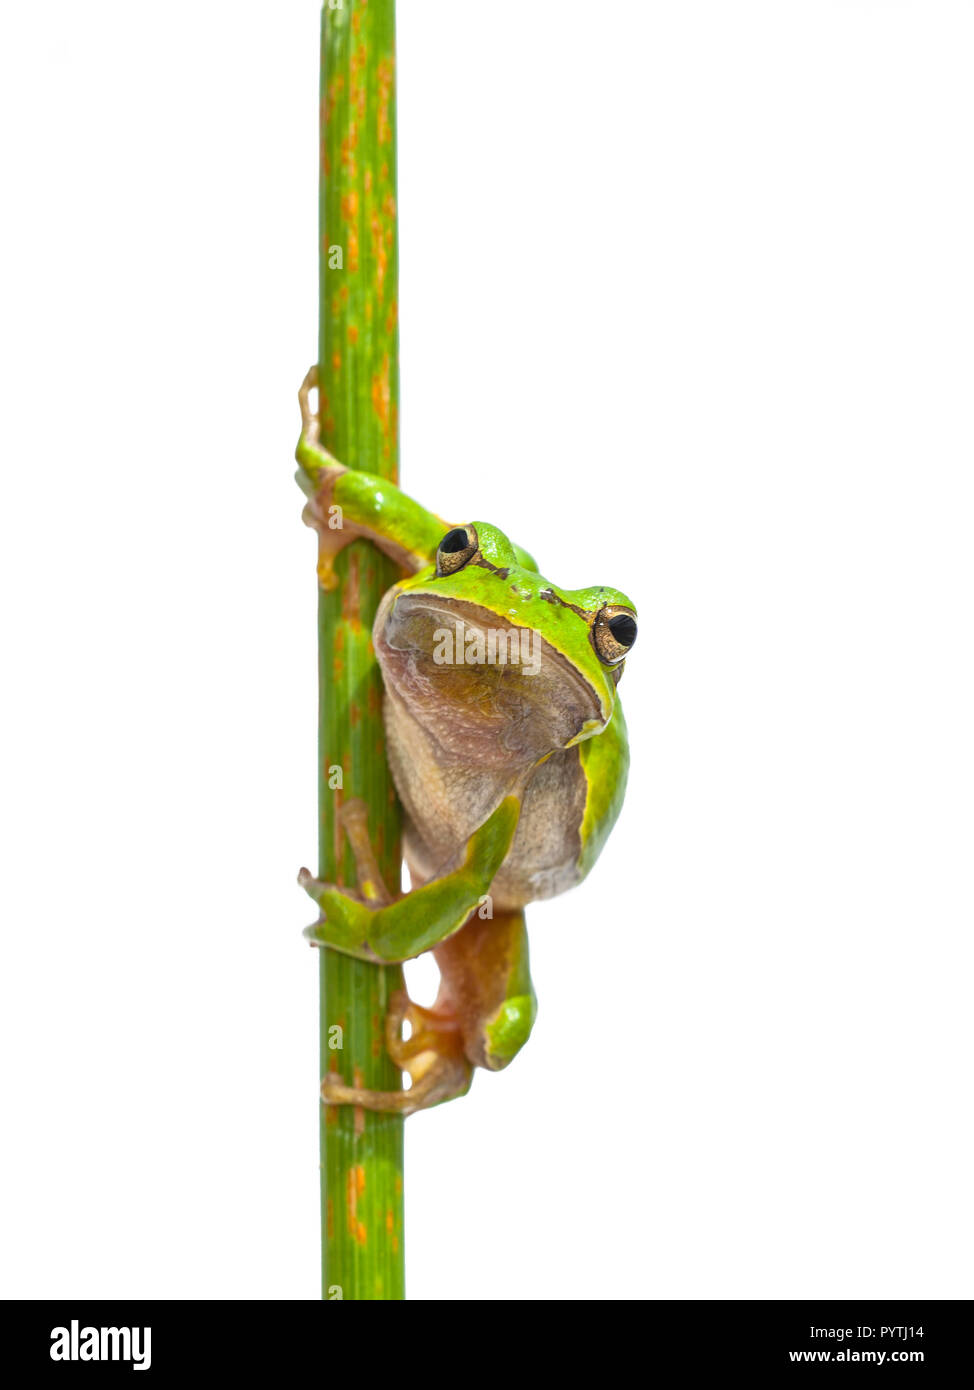 Green European Tree Frog (Hyla arborea) Looking in the camera while perched in a vertical stick, isolated on white background Stock Photo